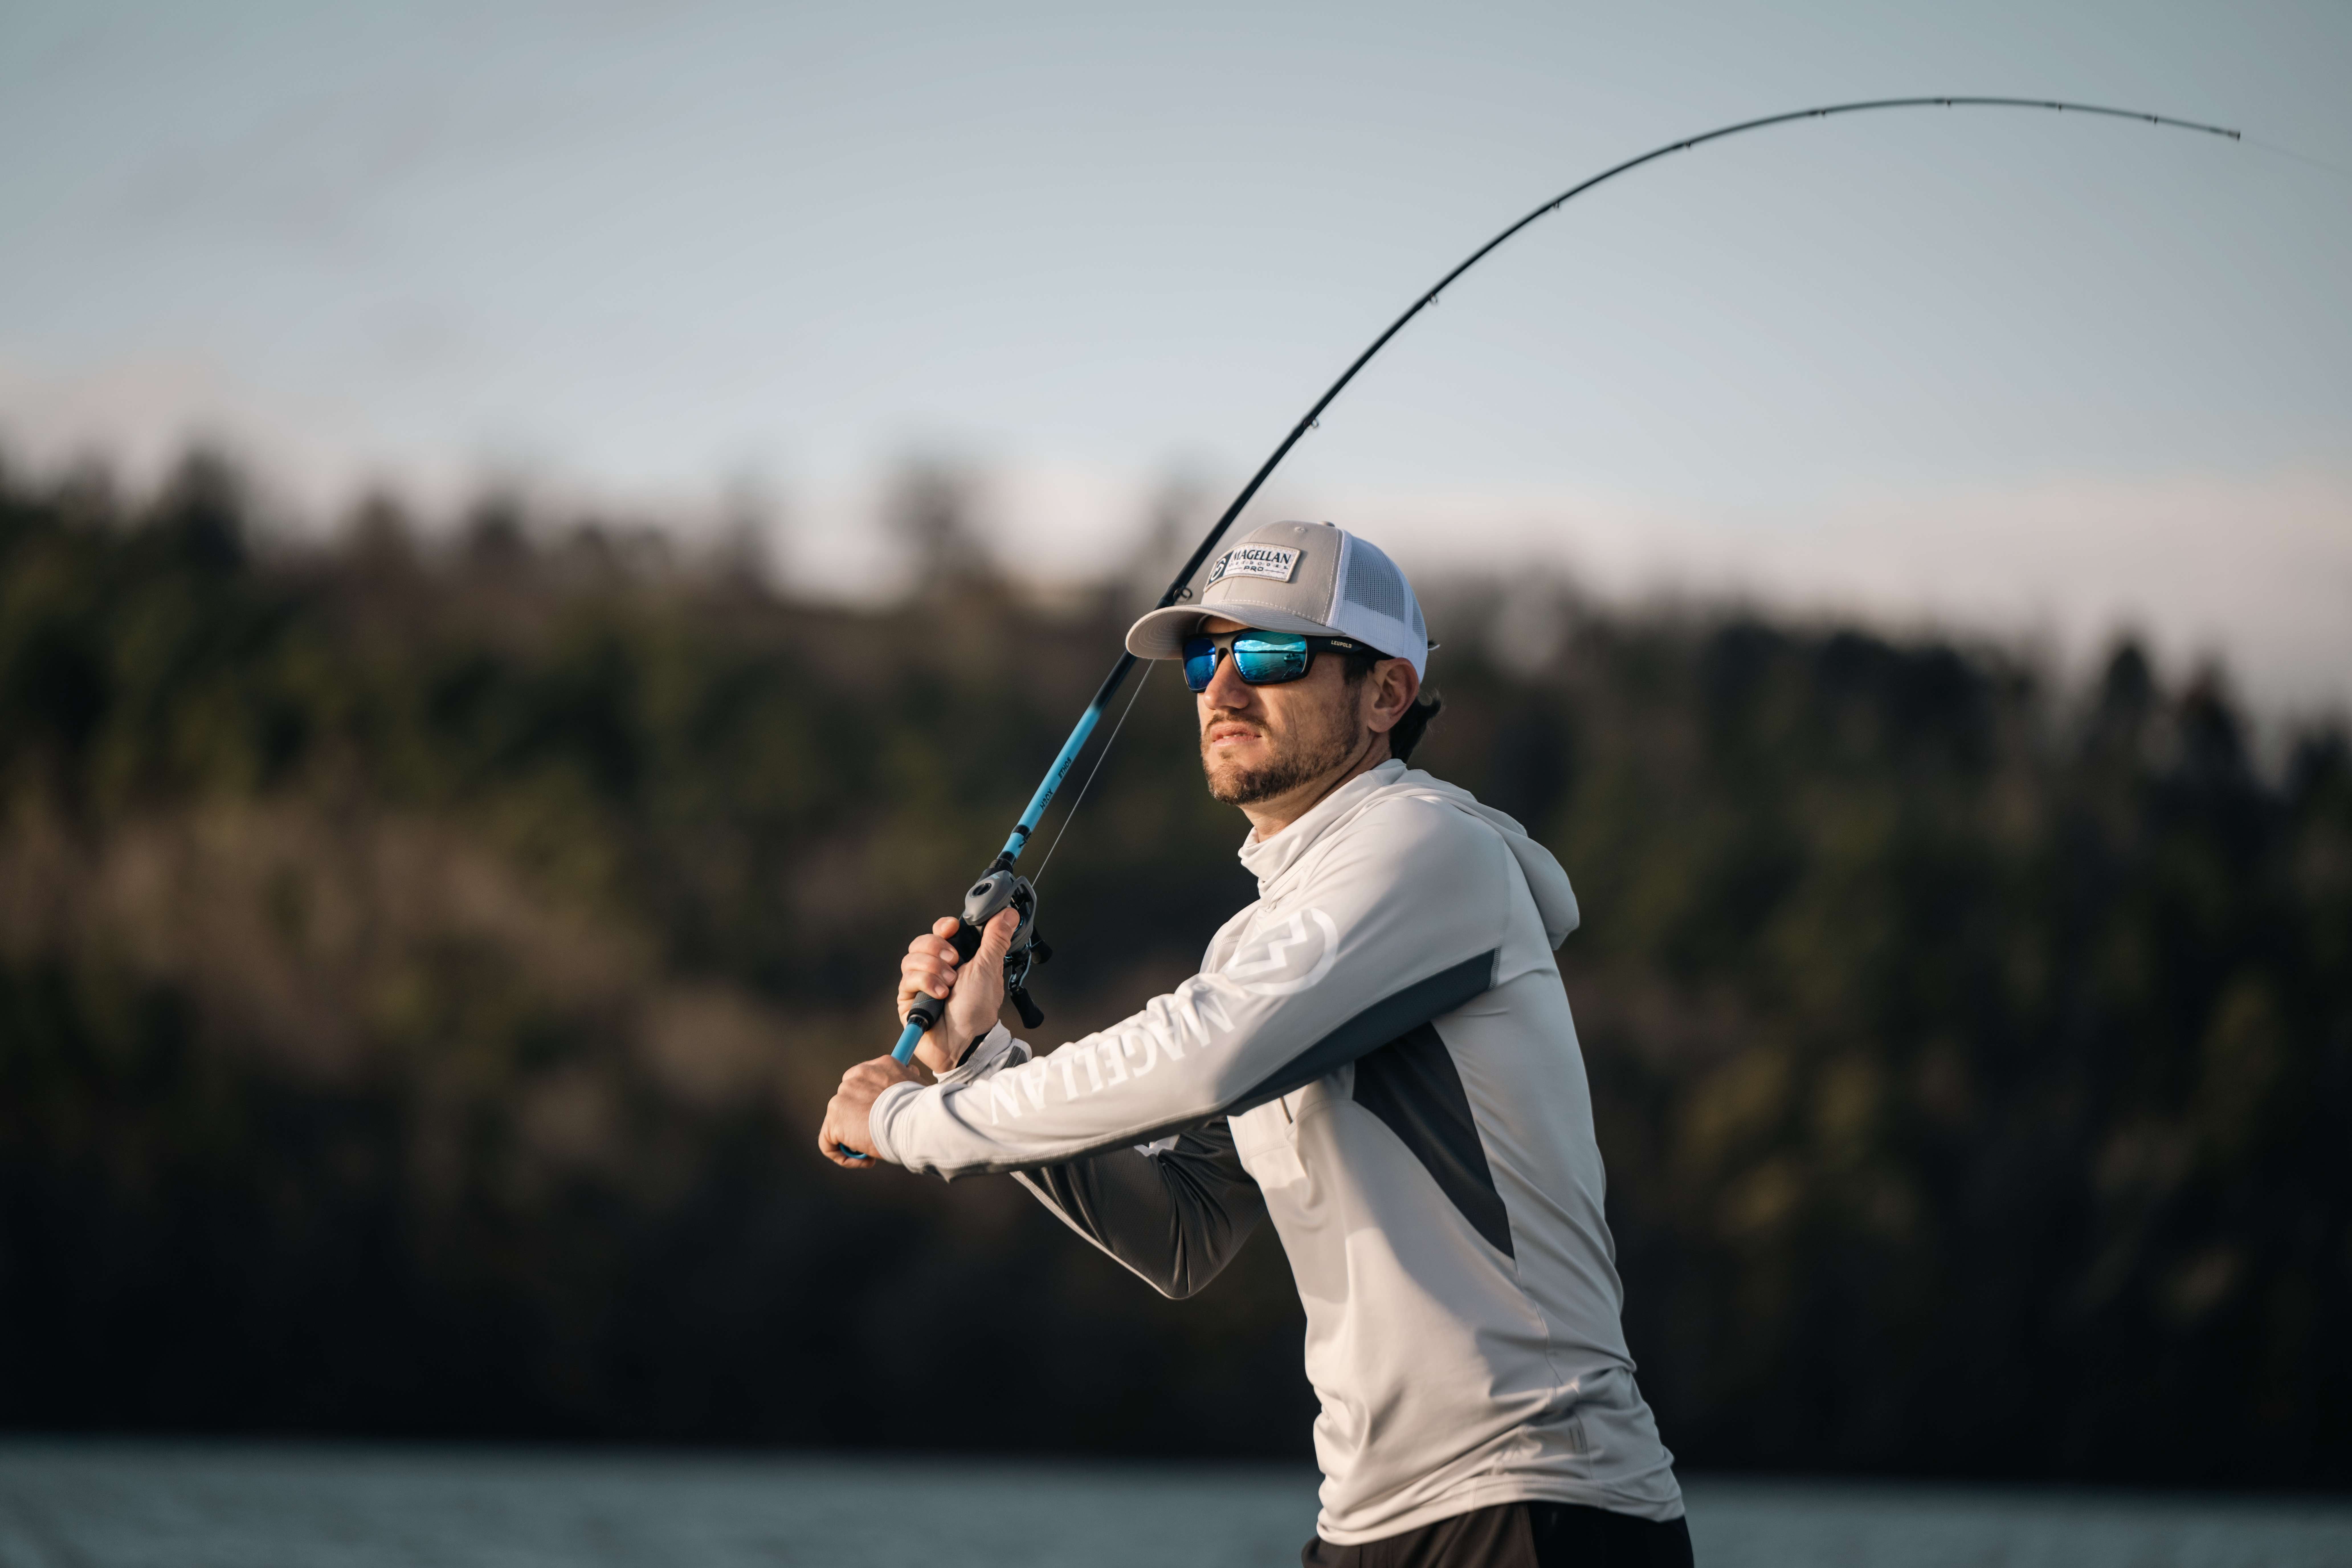  Fly Fishing - Hunting & Fishing: Sports & Outdoors: Reels,  Rods, Rod & Reel Combos & More